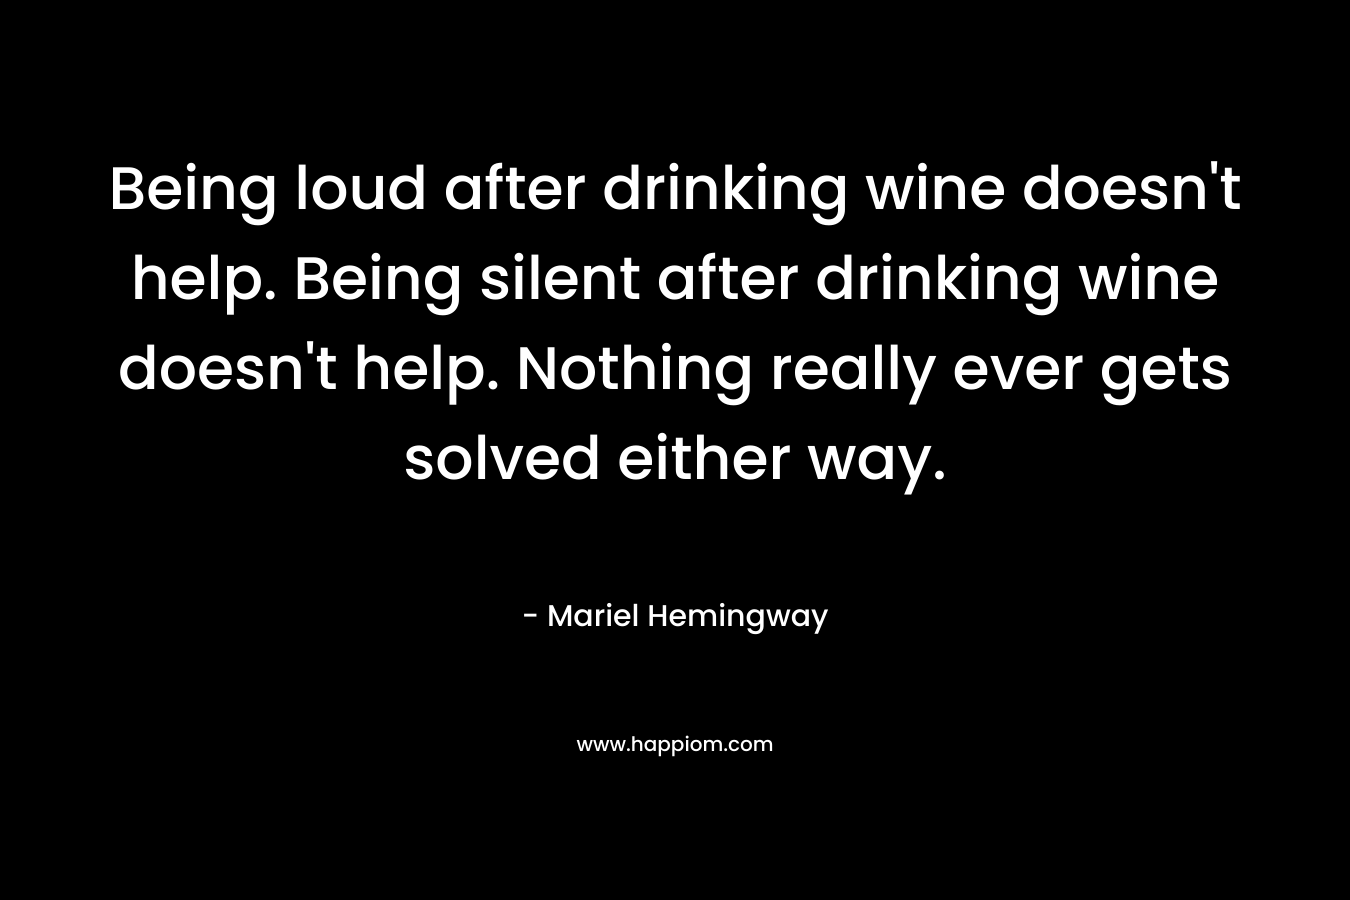 Being loud after drinking wine doesn’t help. Being silent after drinking wine doesn’t help. Nothing really ever gets solved either way. – Mariel Hemingway